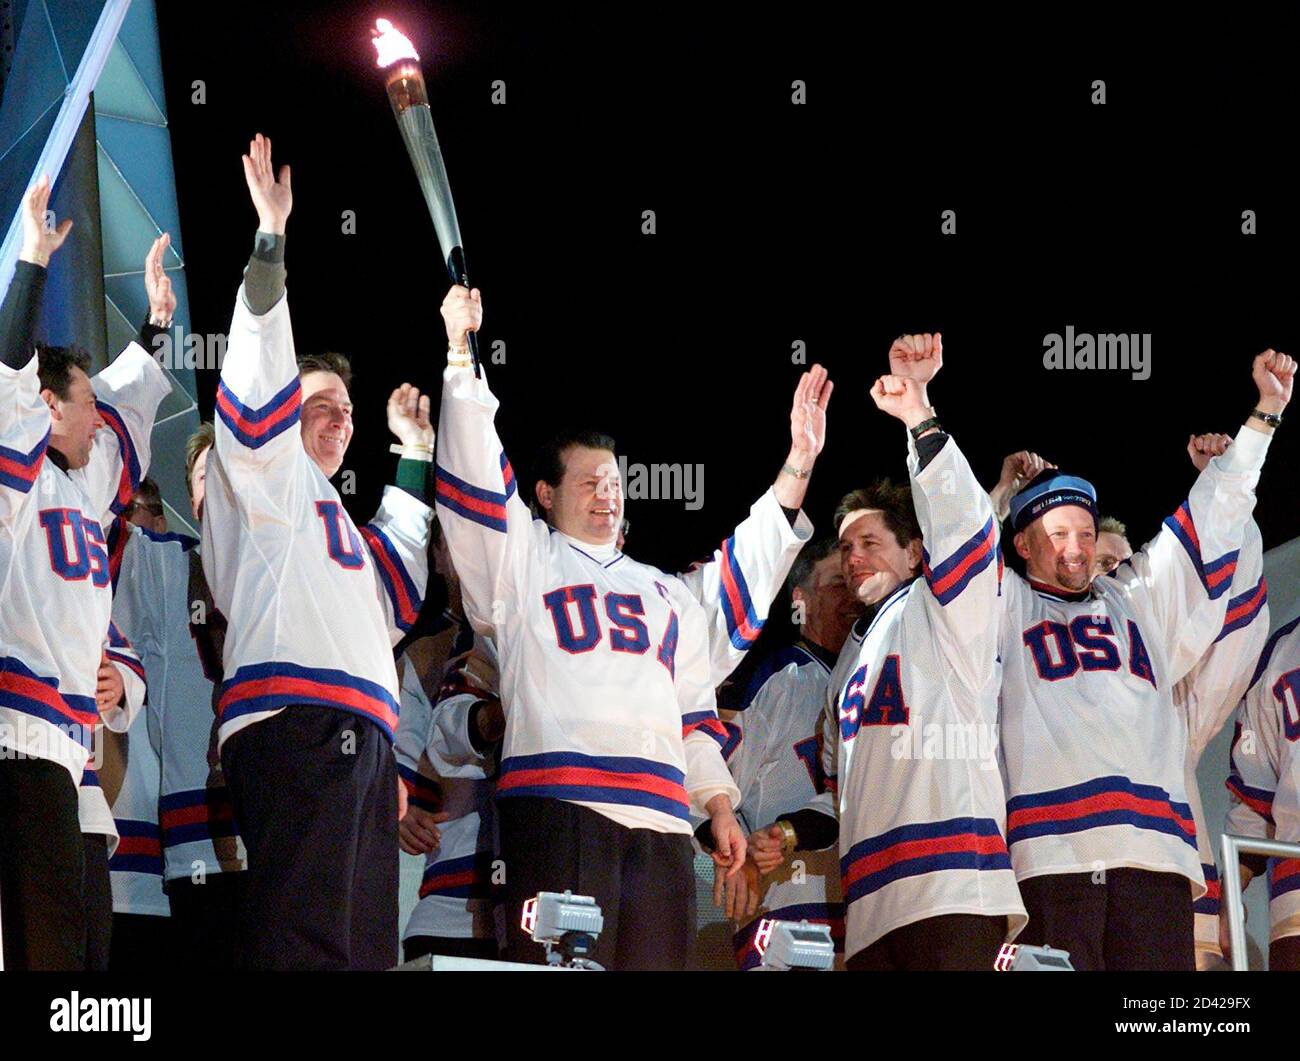 Members of the 1980 United States Olympic hockey team that won the gold  medal in Lake Placid, wave as their former team captain, Mike Eruzione,  holds the Olympic torch during the opening